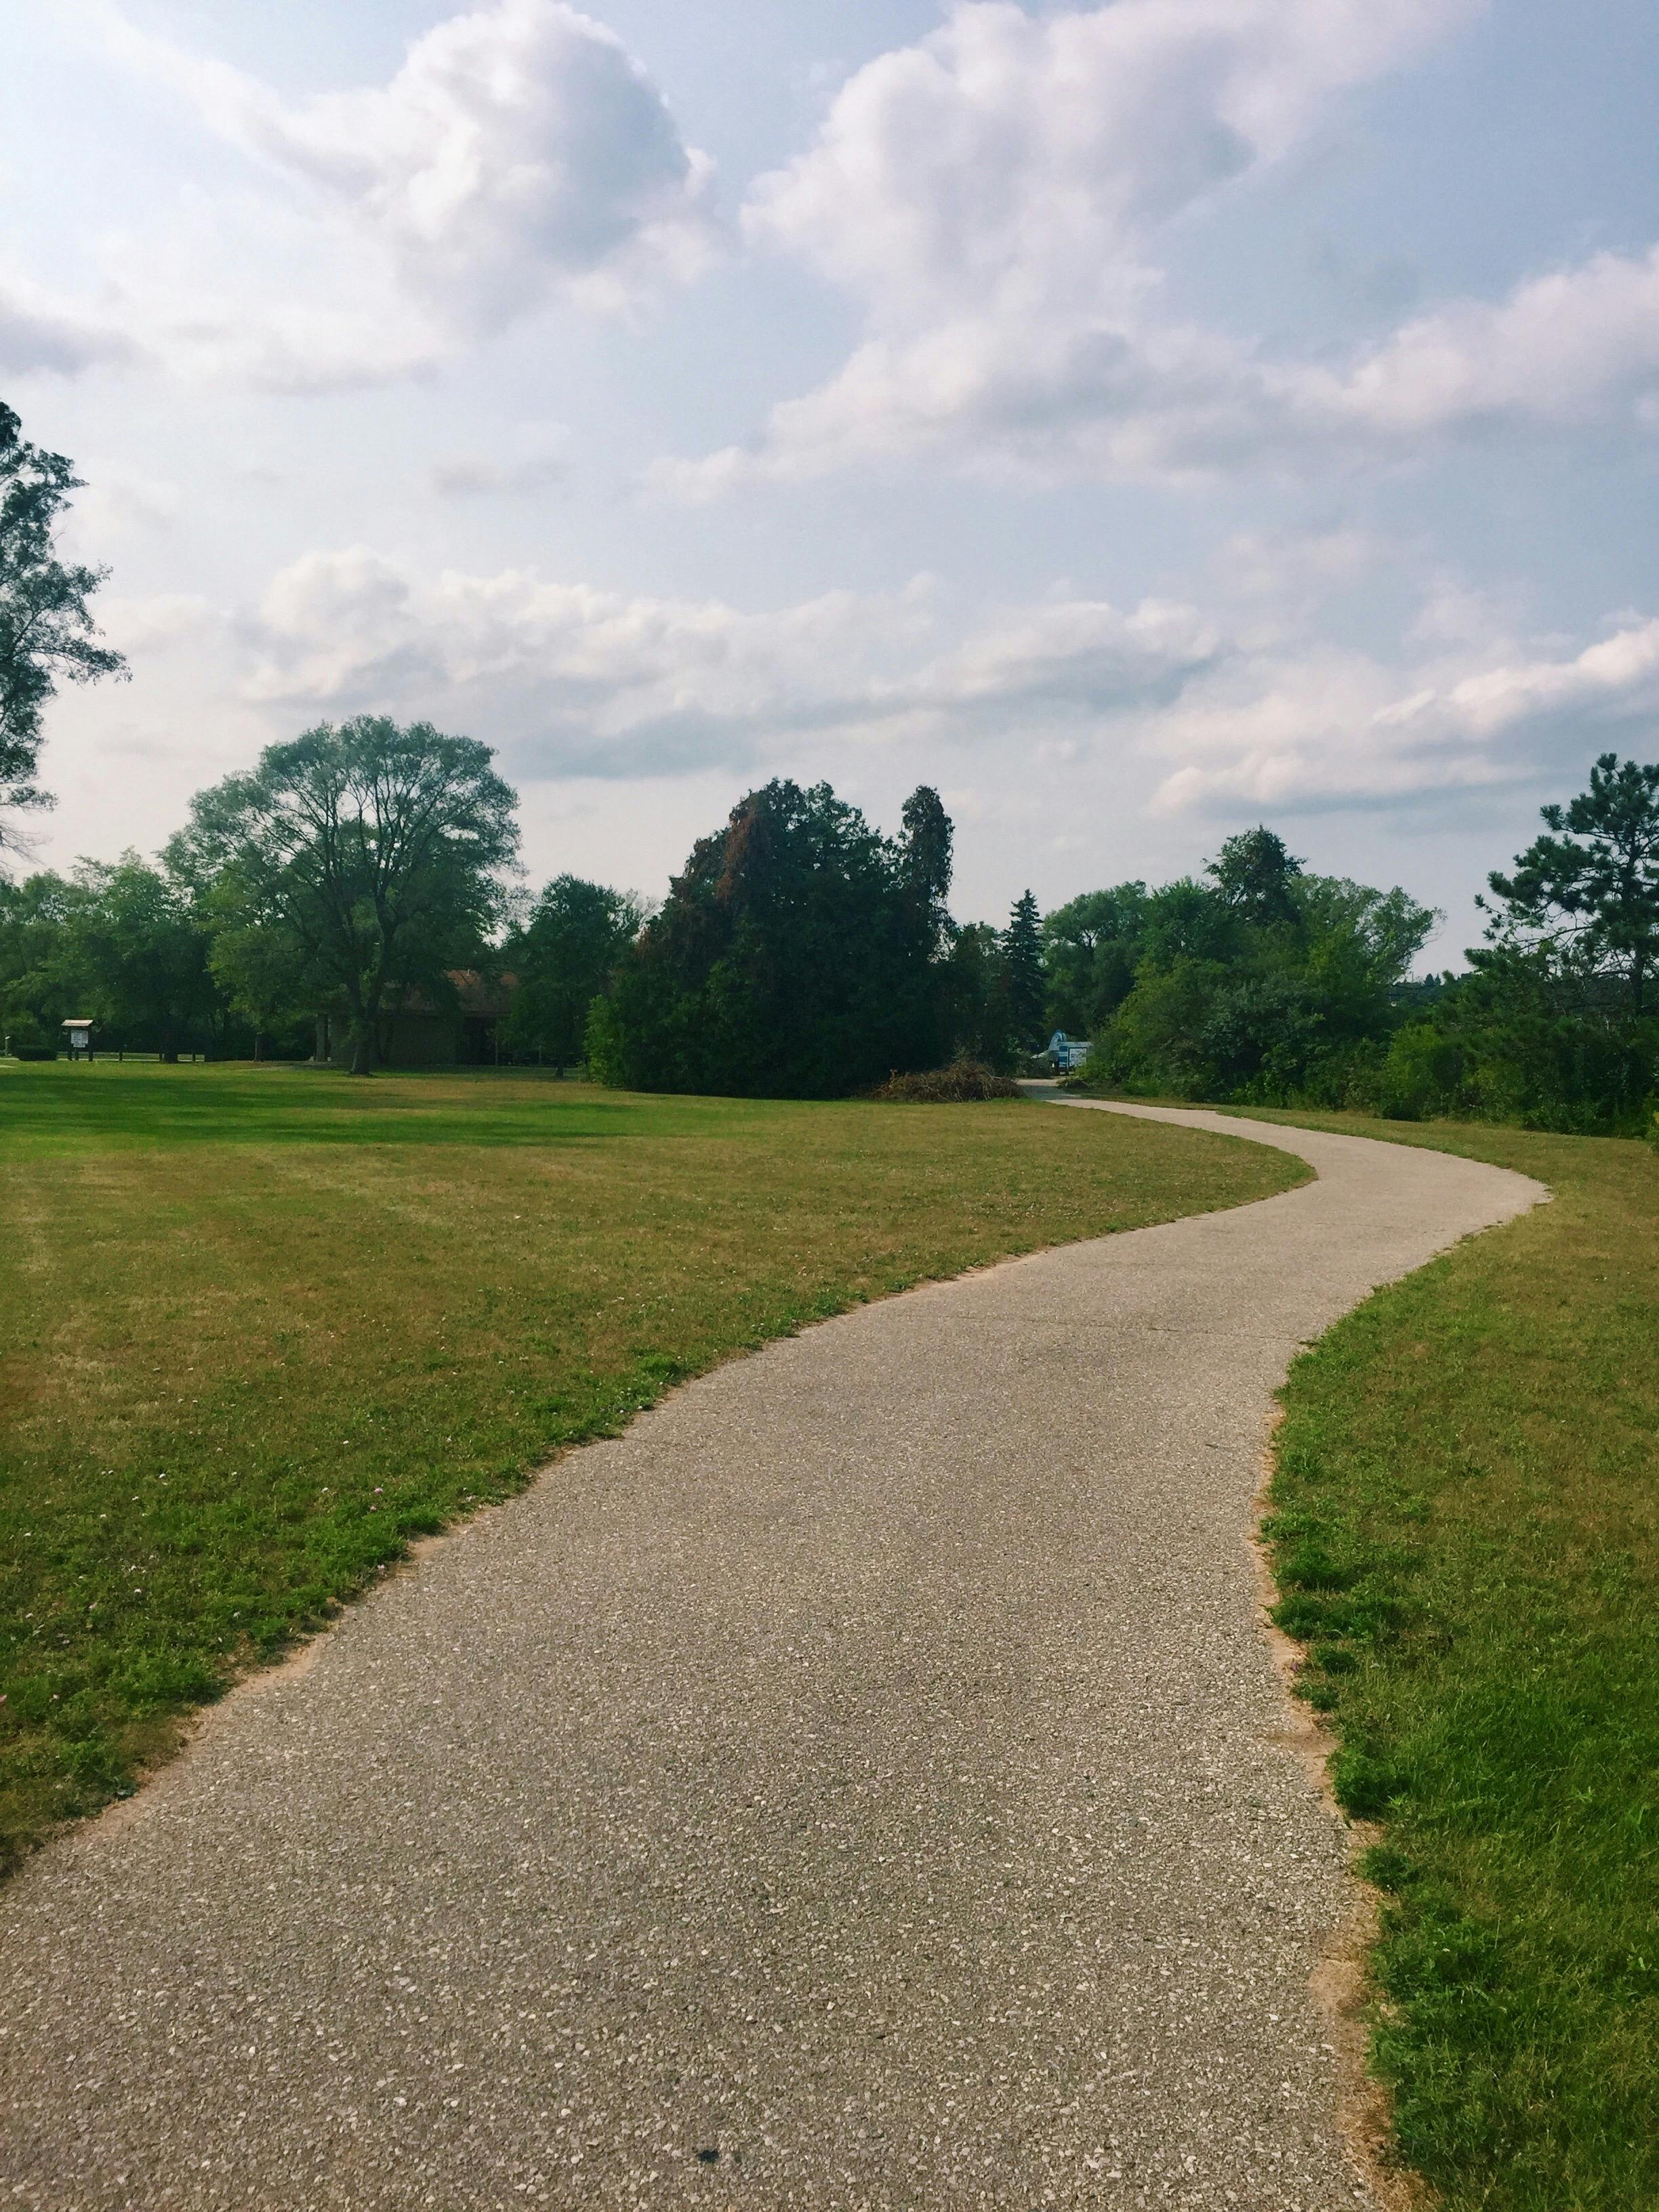 Free stock photo of running track, Running trail, trails